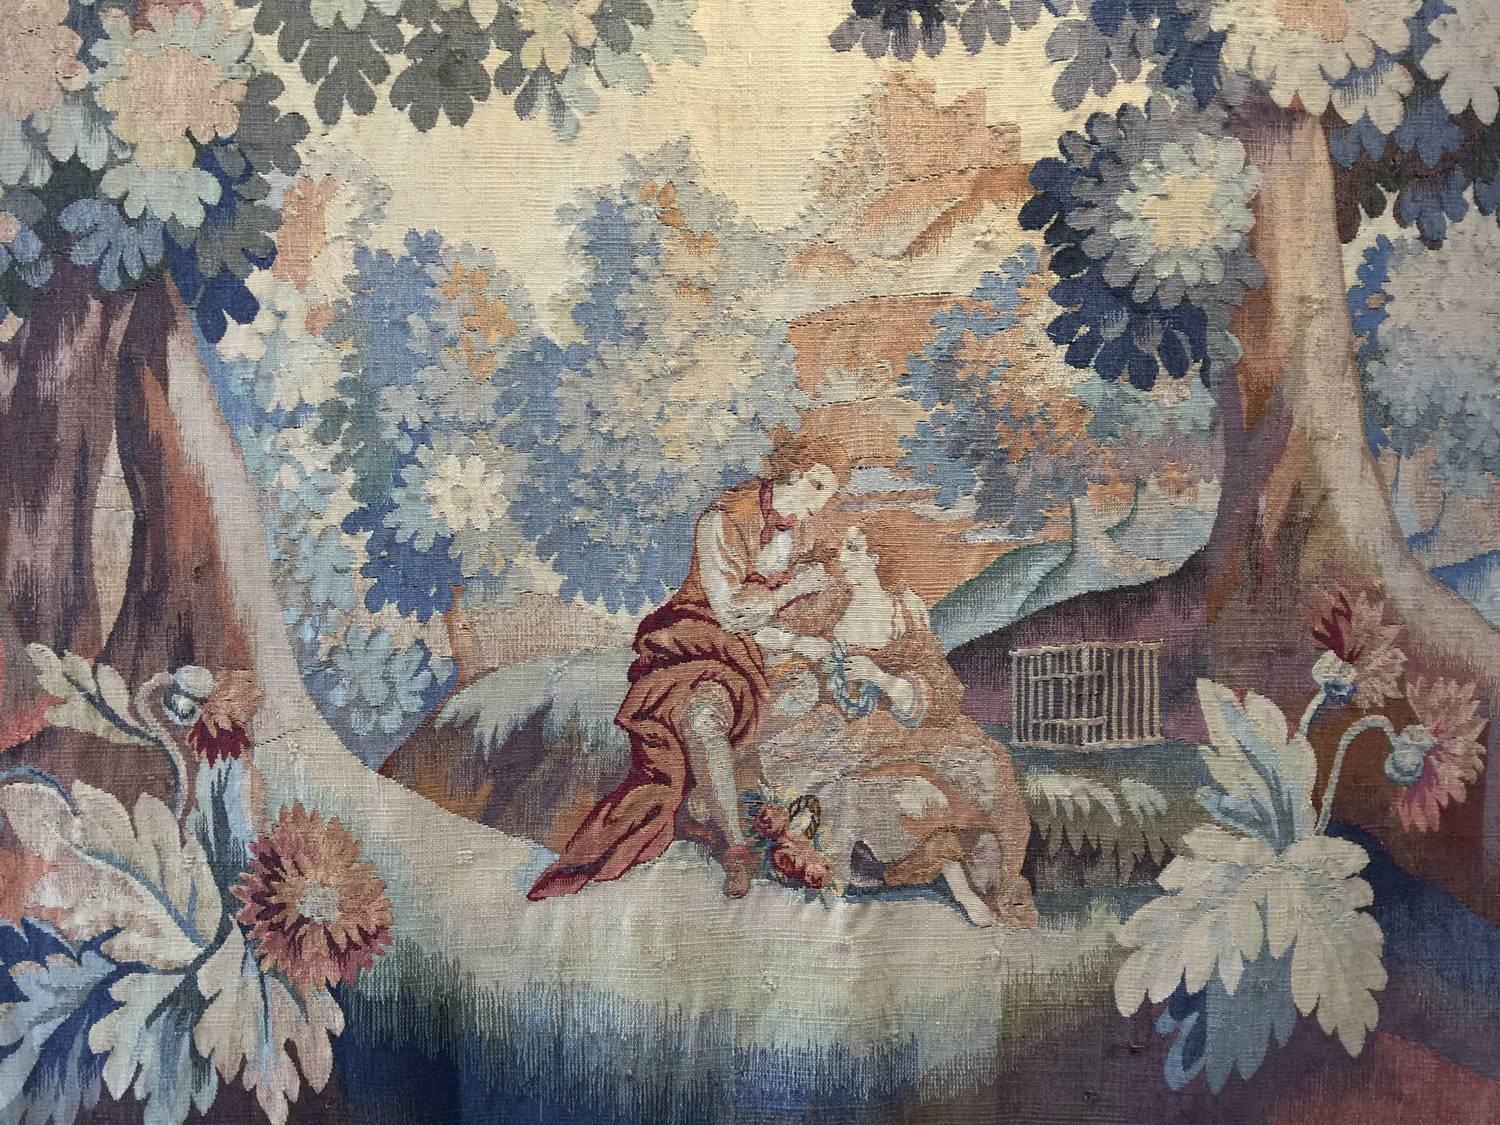 A fabulous 19th-century handwoven tapestry in excellent condition. The scene of lovers celebration among nature. A similar technique is used for making the tapestry, as in Aubusson and Needlepoint in the flat weave role. These decorative area rugs